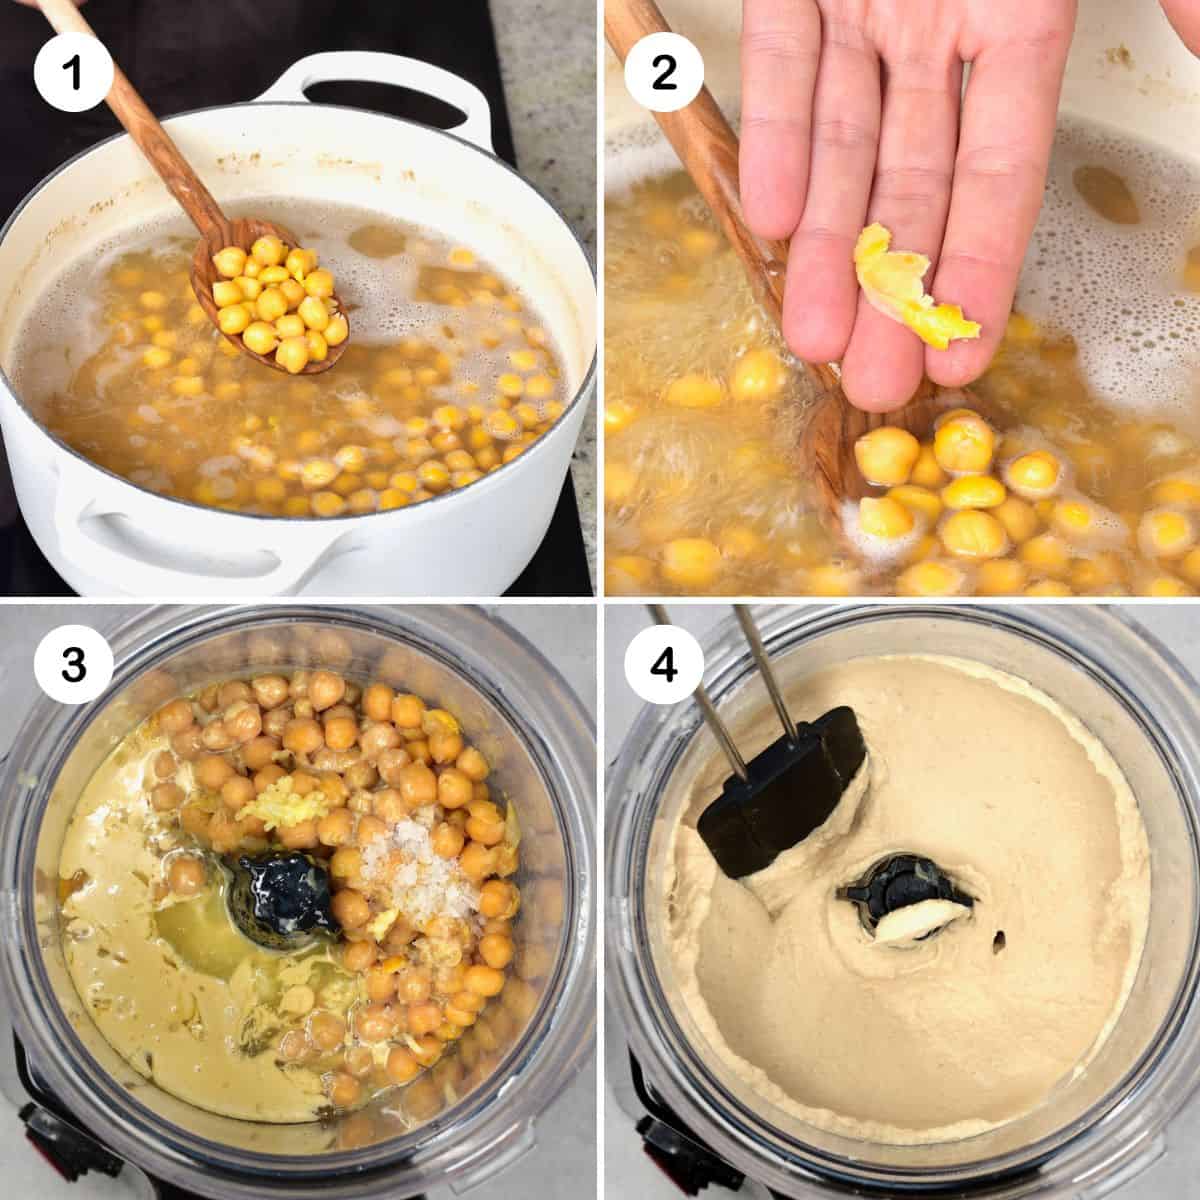 Steps for cooking chickpeas and blending them